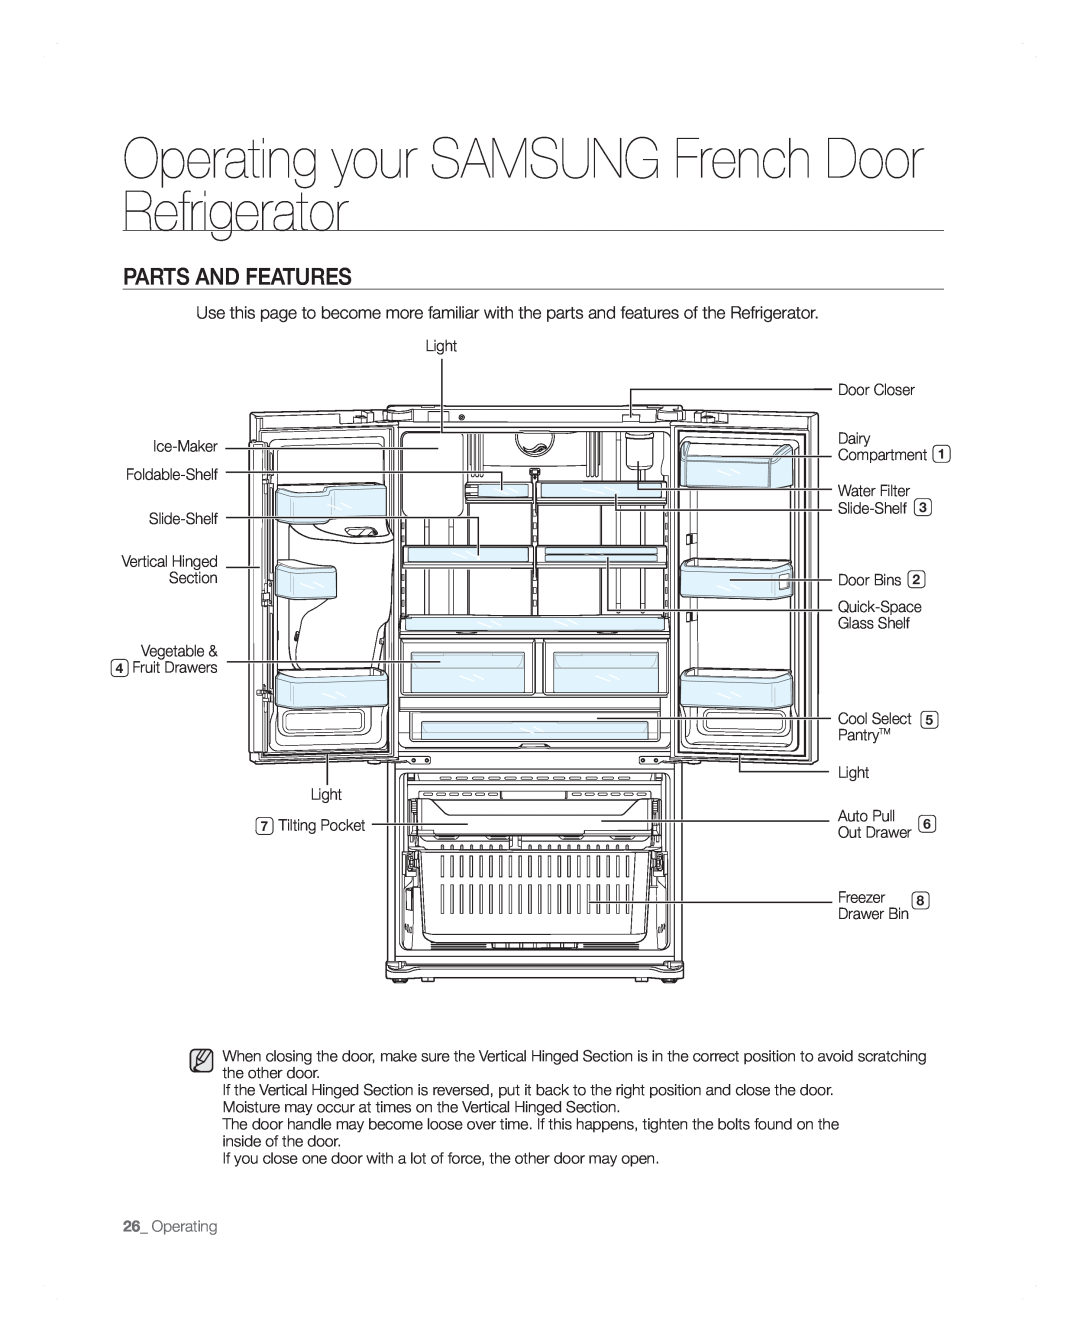 Samsung RFG297AARS user manual Parts And Features, Operating your SAMSUNG French Door Refrigerator, Auto Pull, Out Drawer 